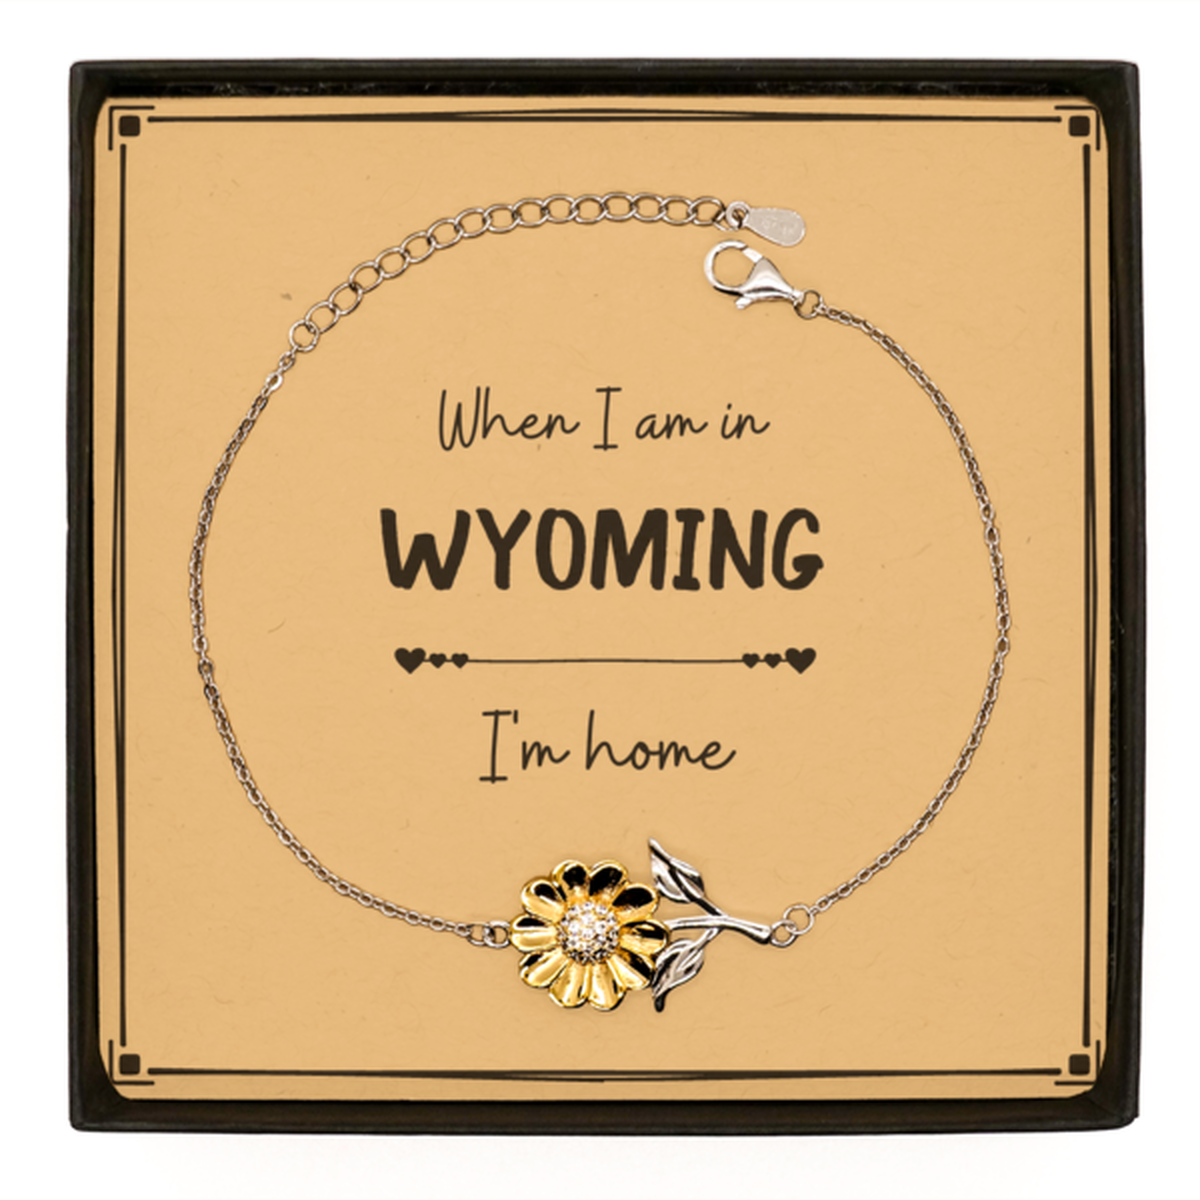 When I am in Wyoming I'm home Sunflower Bracelet, Message Card Gifts For Wyoming, State Wyoming Birthday Gifts for Friends Coworker